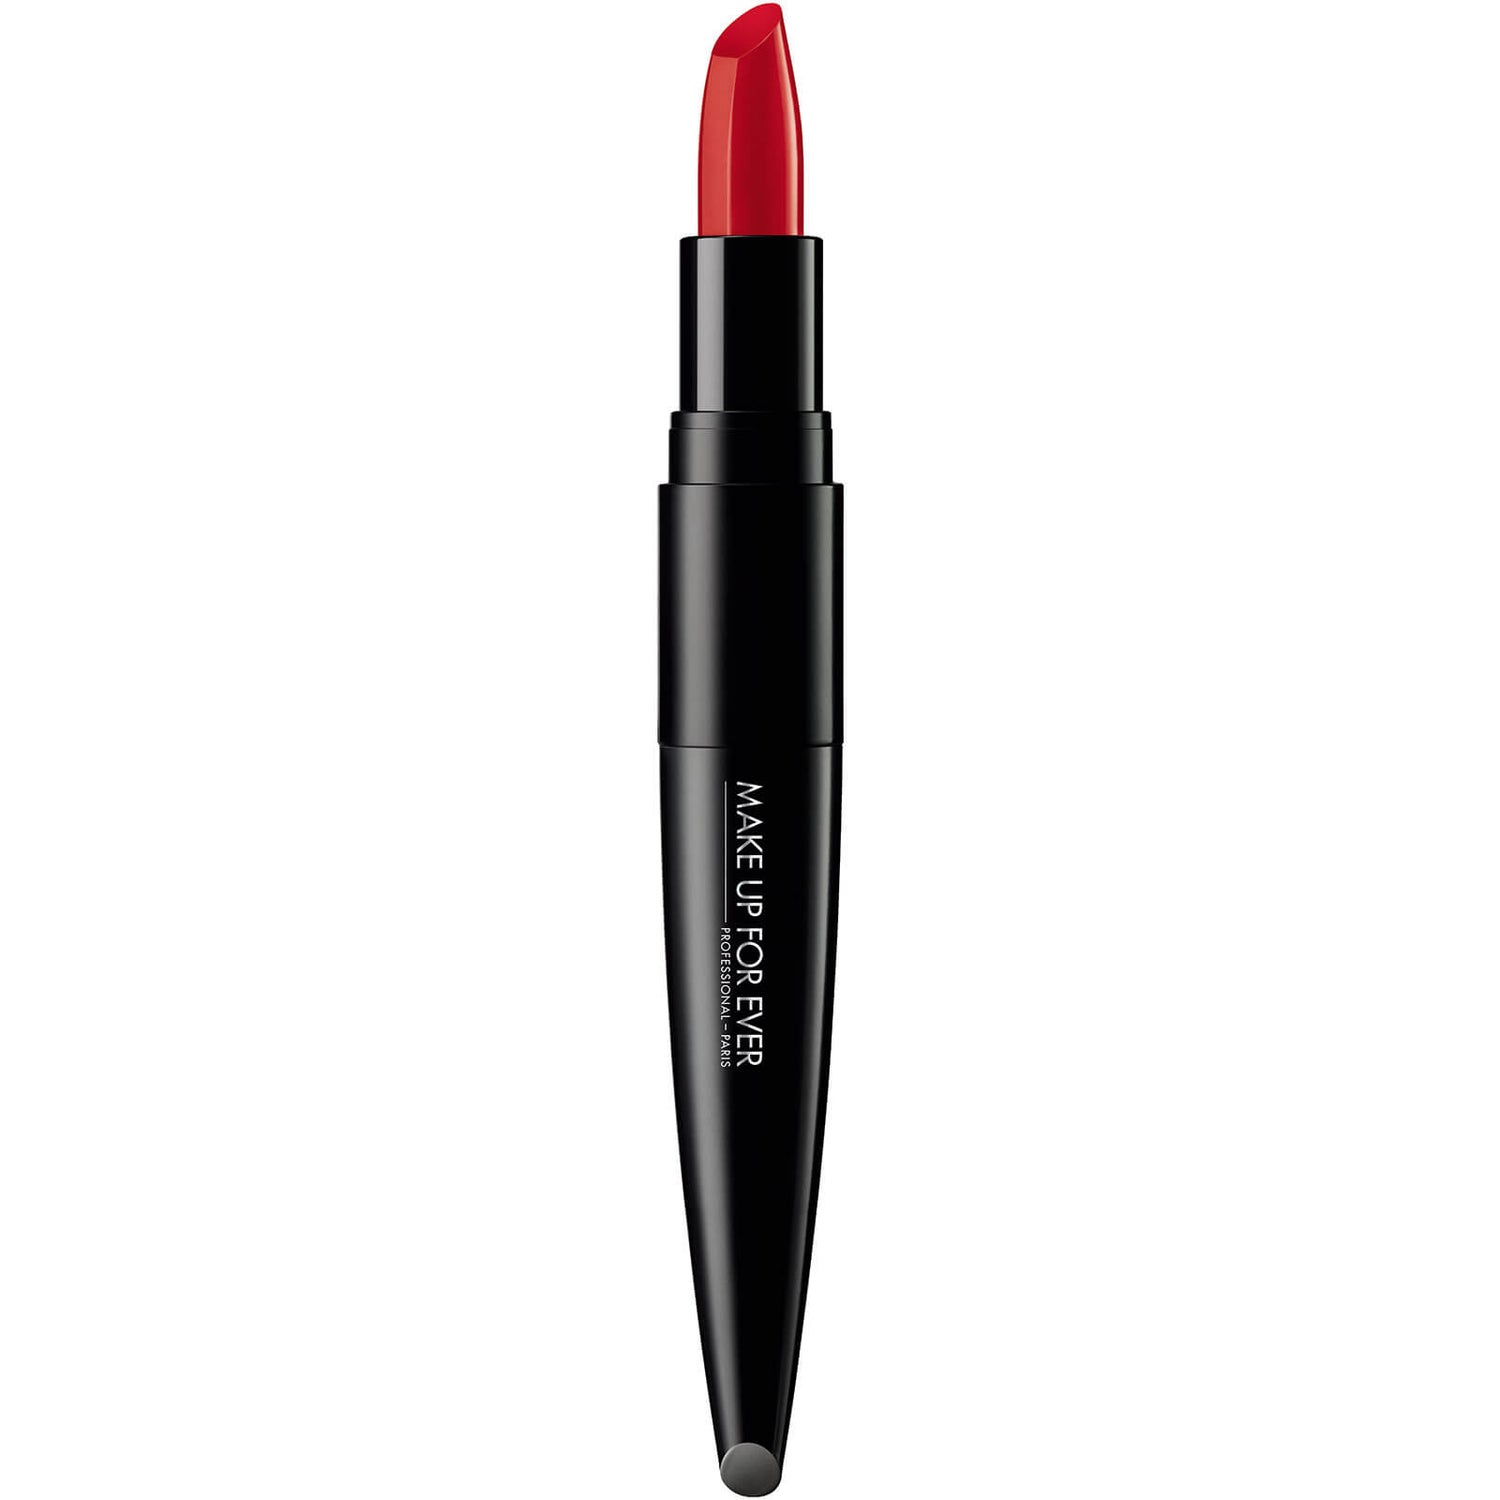 MAKE UP FOR EVER rouge Artist Lipstick 3.2g (Various Shades) -